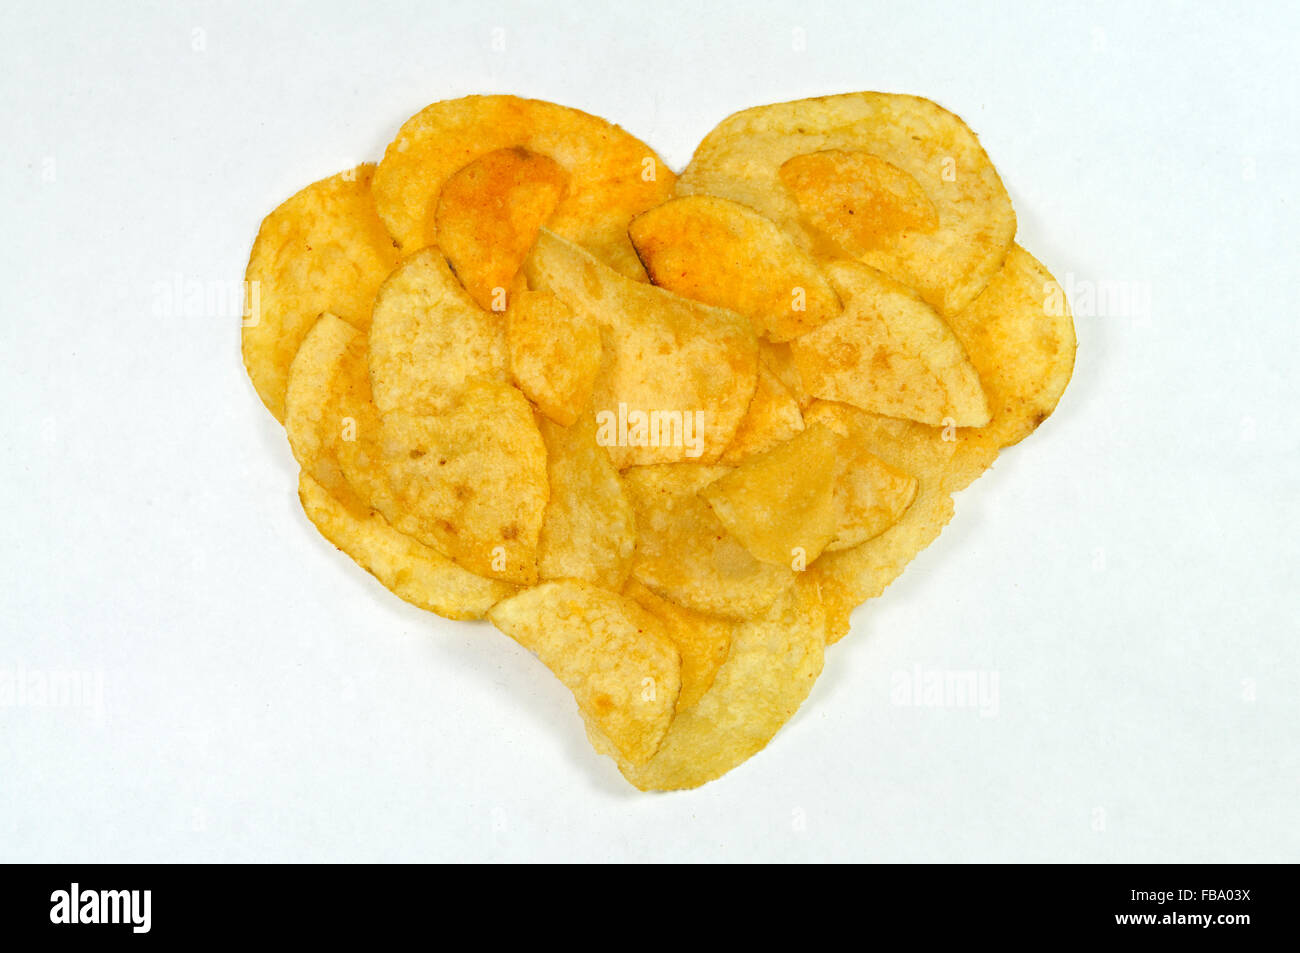 Crisps in the shape of a heart. Stock Photo